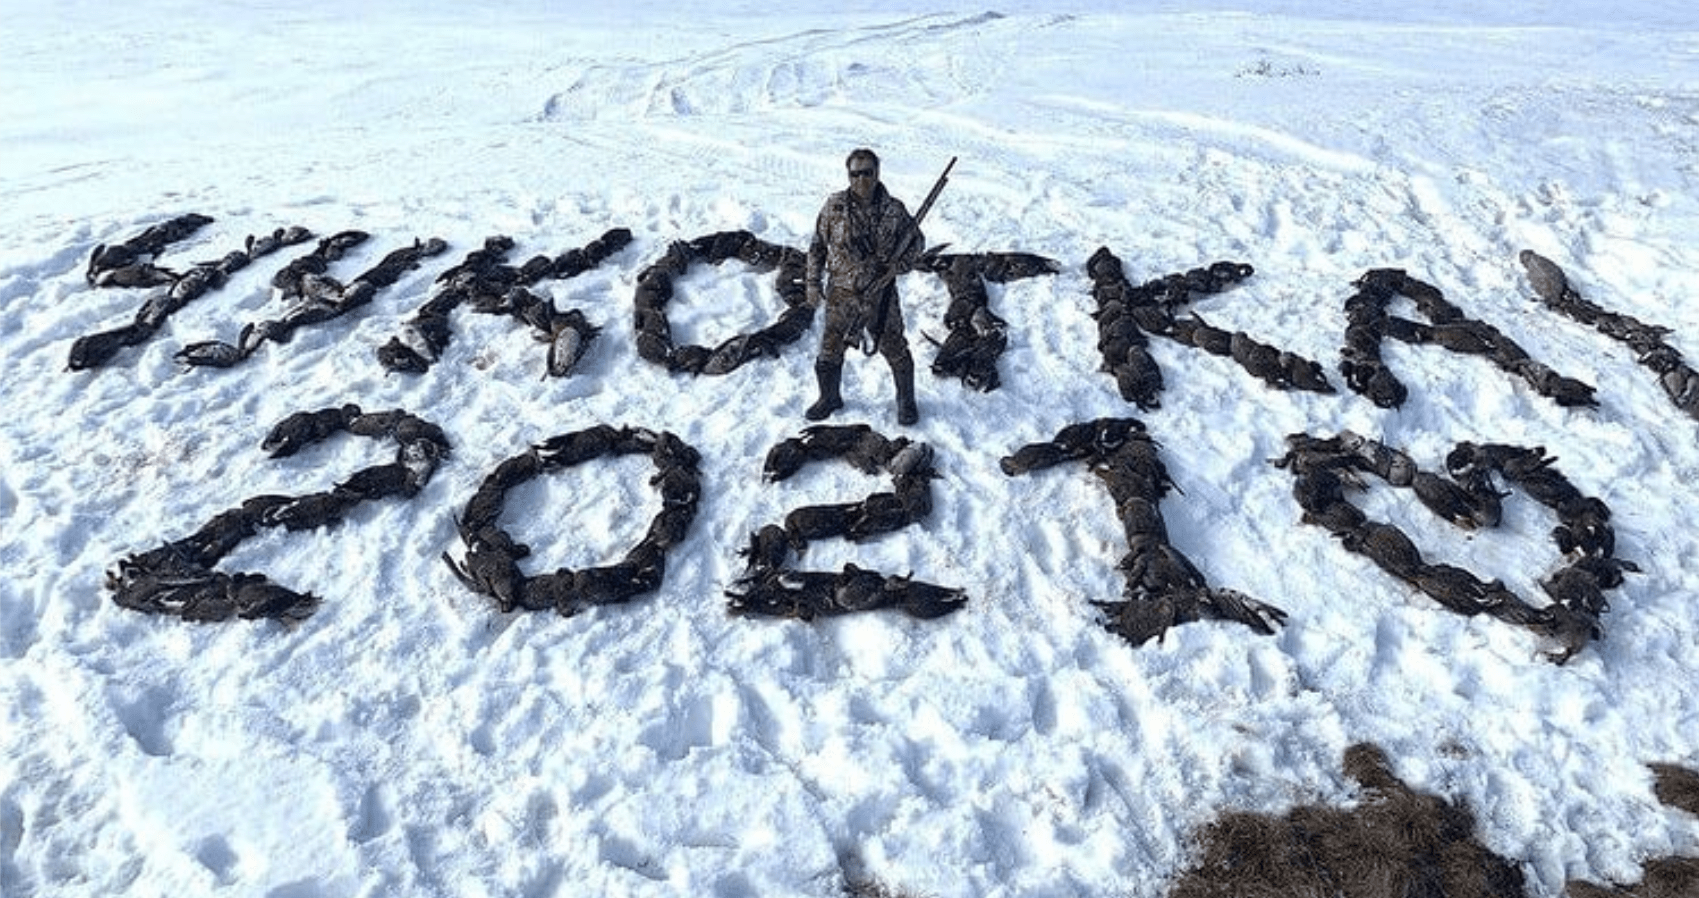 Photo: Aleksandr Kramarenko holding a hunting rifle and standing in the middle of a snowy field where what appeared to be almost 200 dead wild birds were arranged to spell out the words "Chukotka 2021". Credit: @hunting_in_siberia/Instagram